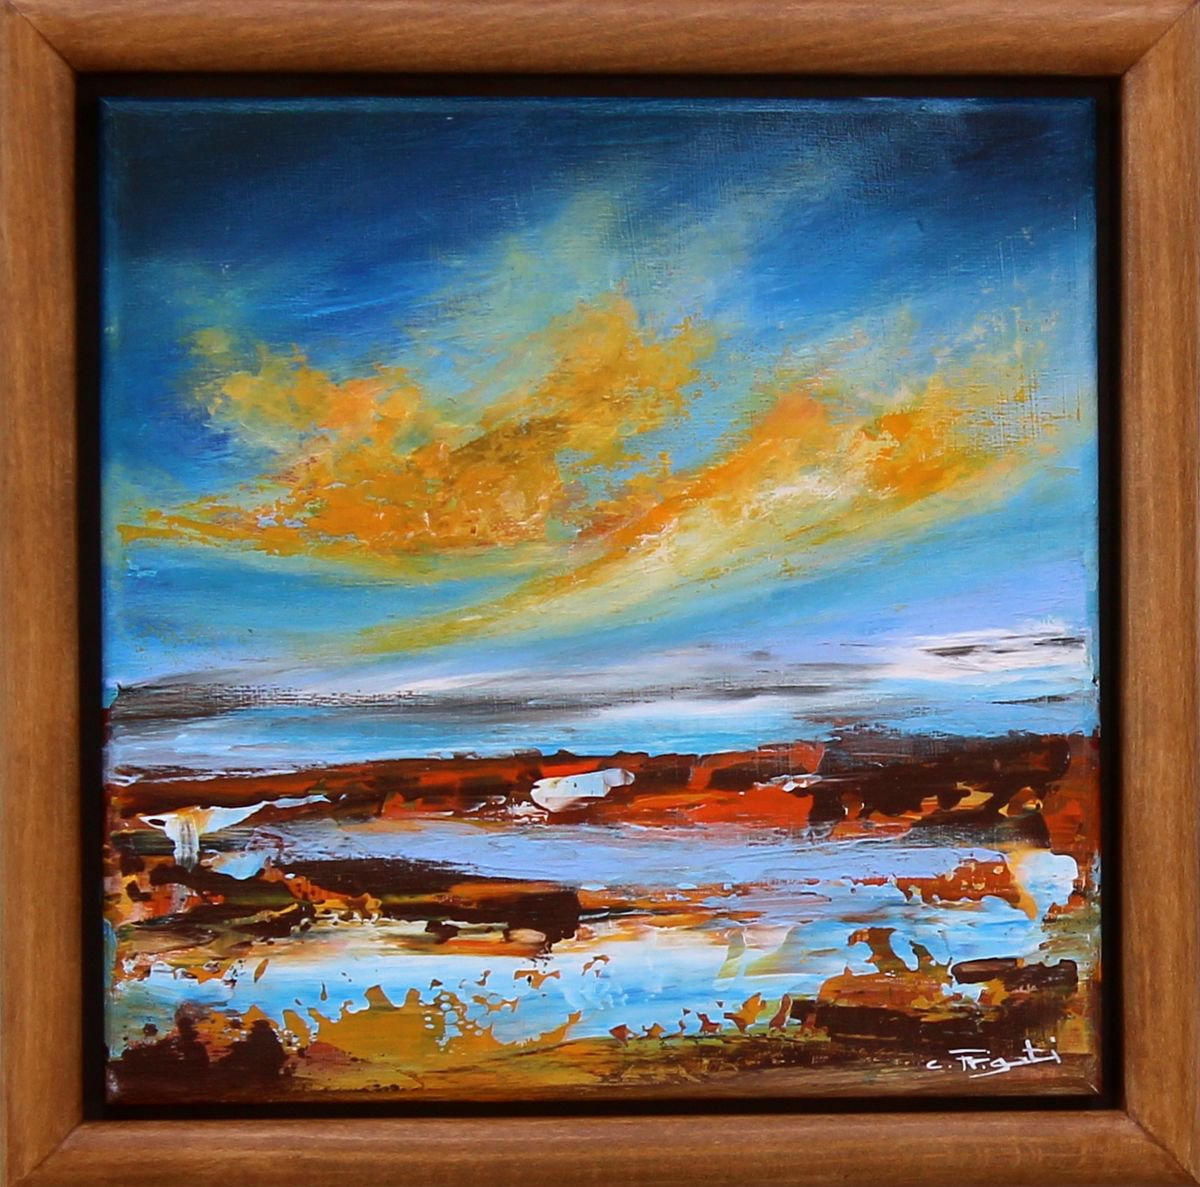 Sweet Afternoons - Framed original abstract landscape by Cecilia Frigati